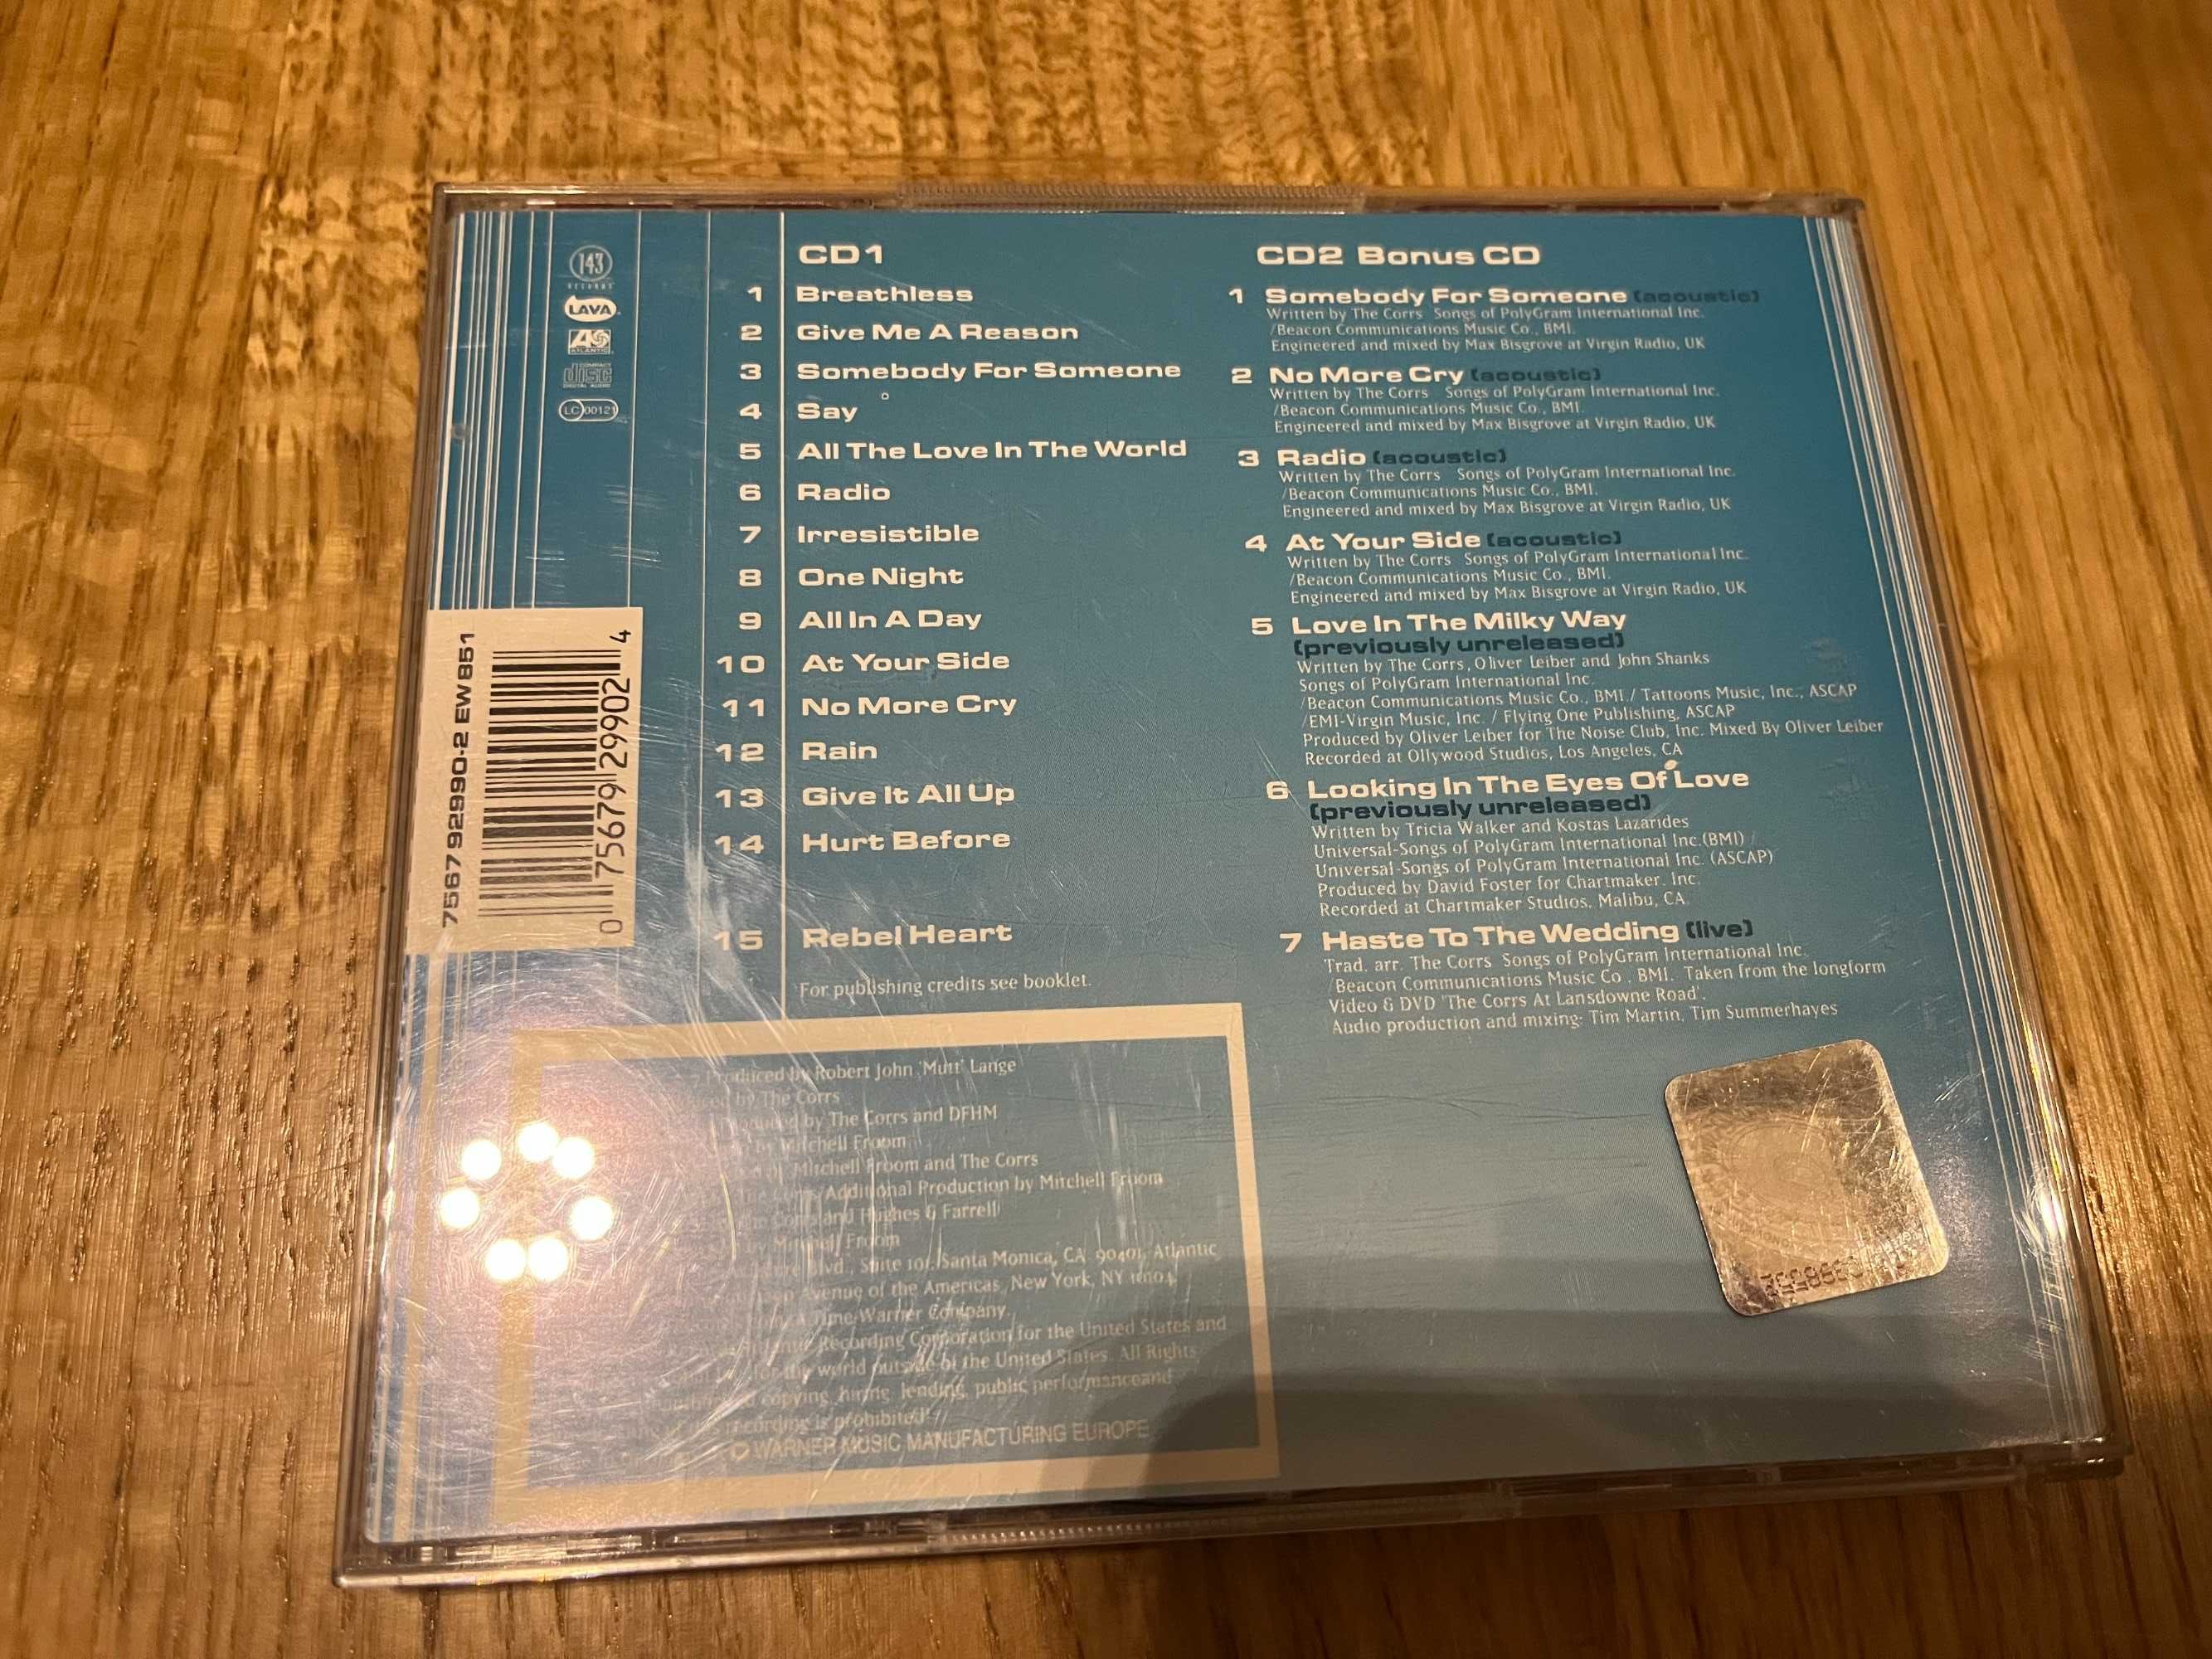 The Corrs In Blue Special Edition 2 CD